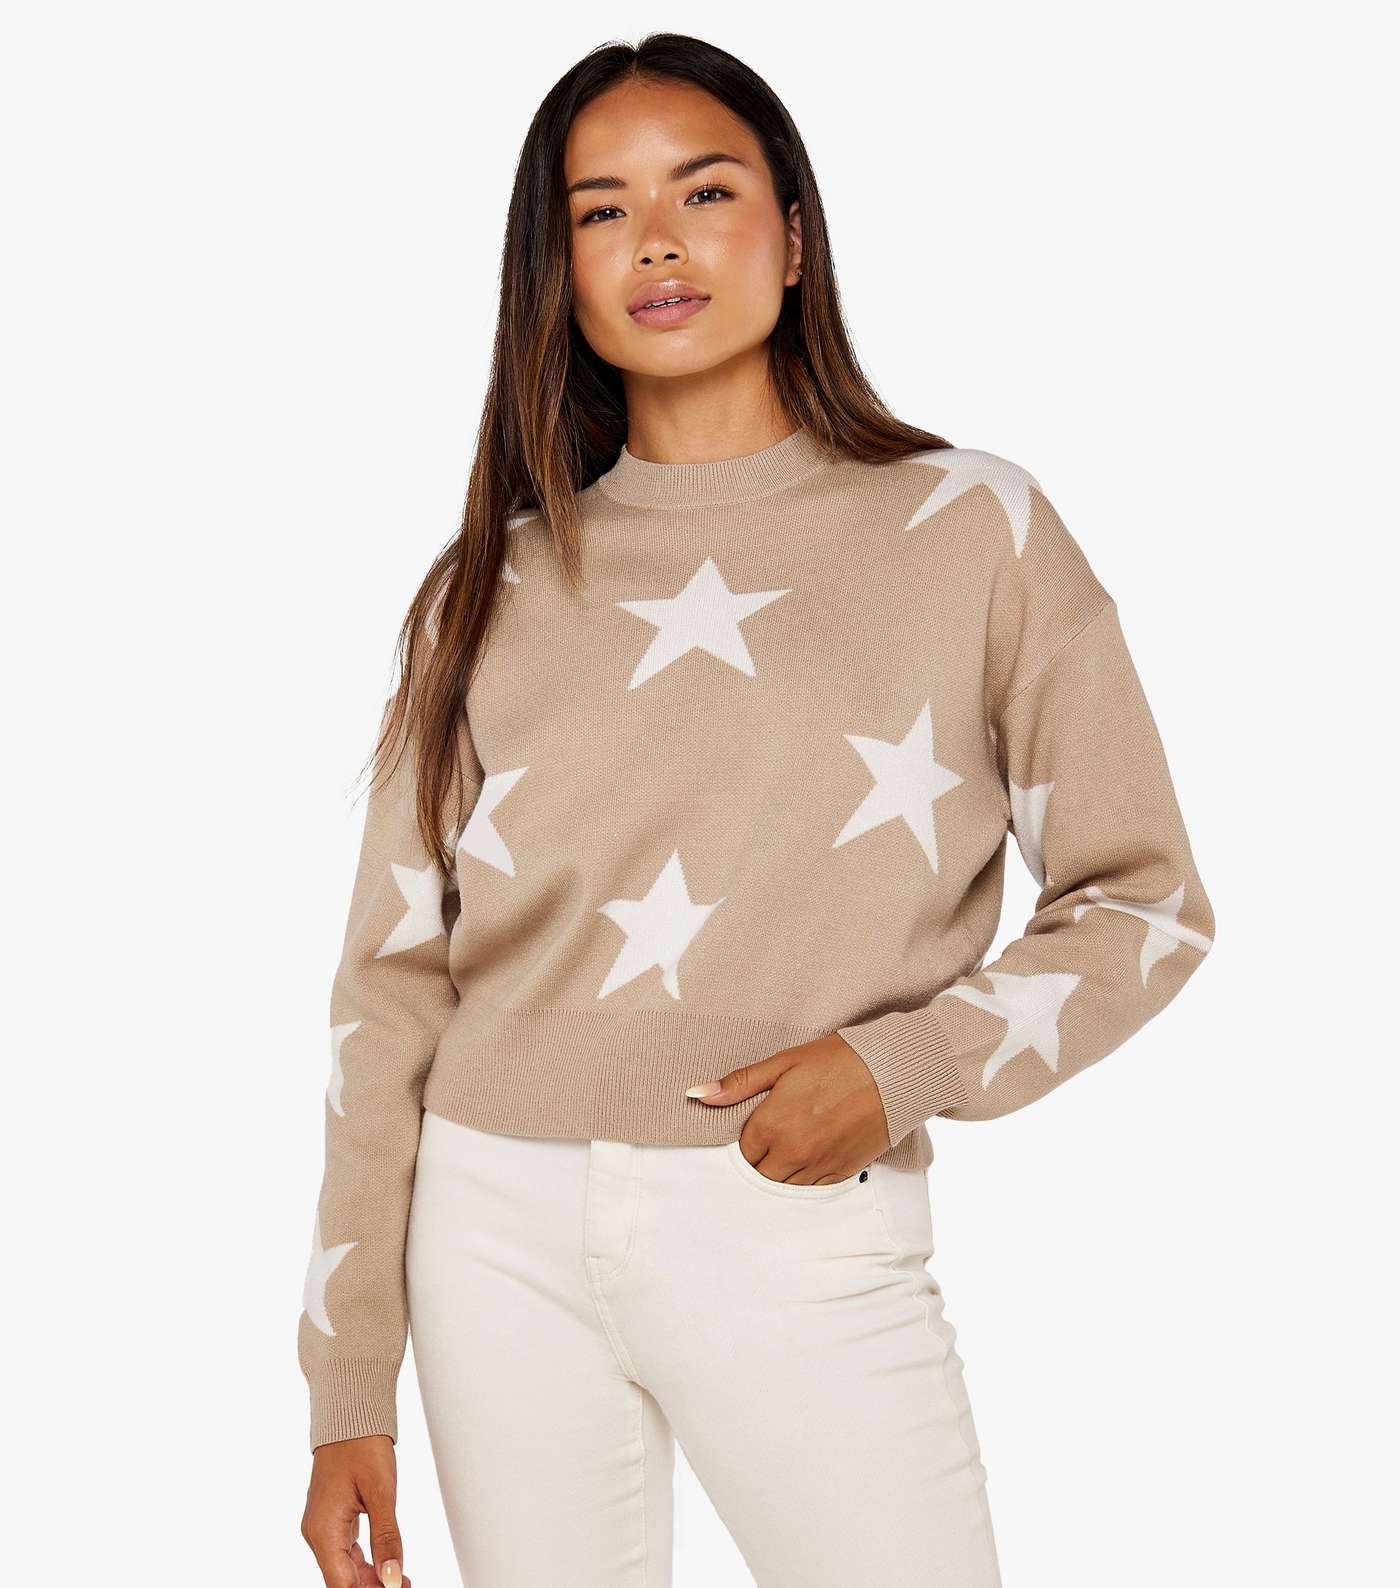 Apricot Stone Star Knit Crew Neck Long Sleeve Jumper Image 2